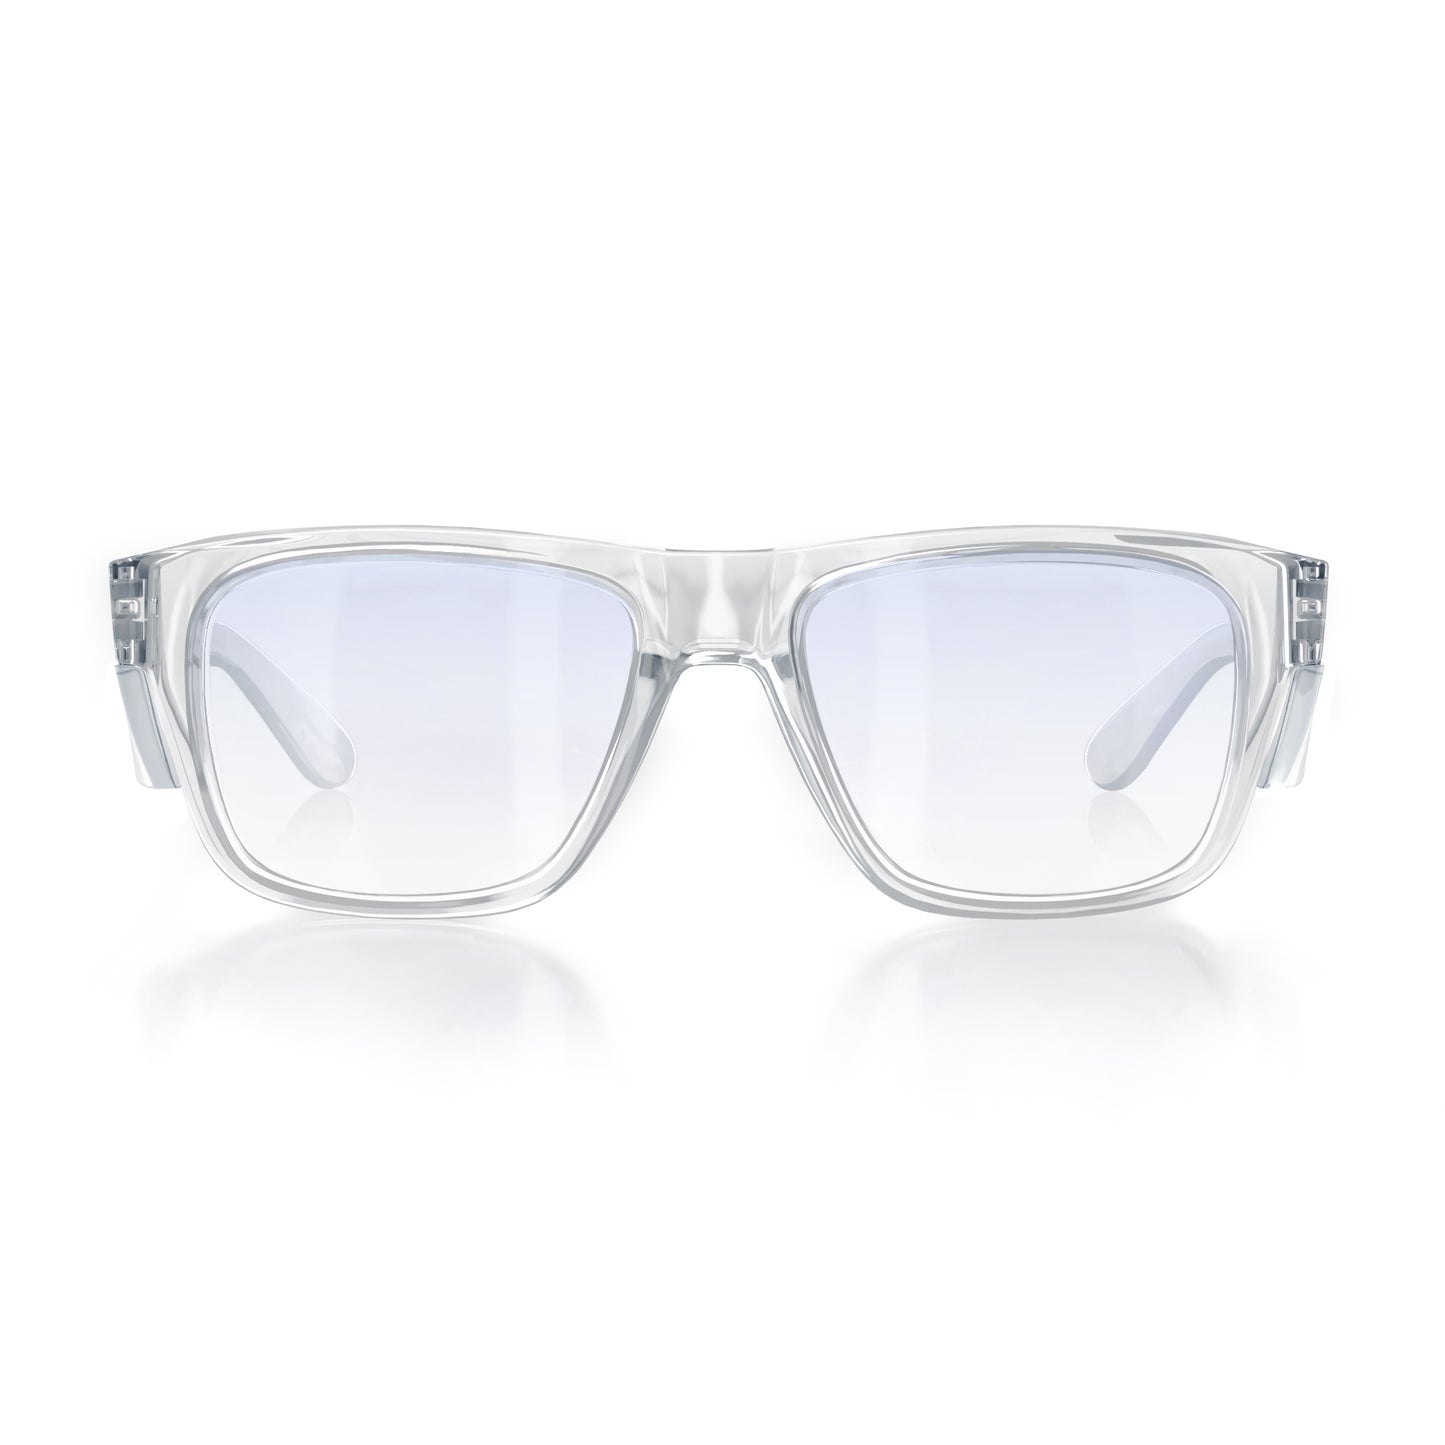 SafeStyle Fusions Clear Frame/Blue Light Blocking UV400